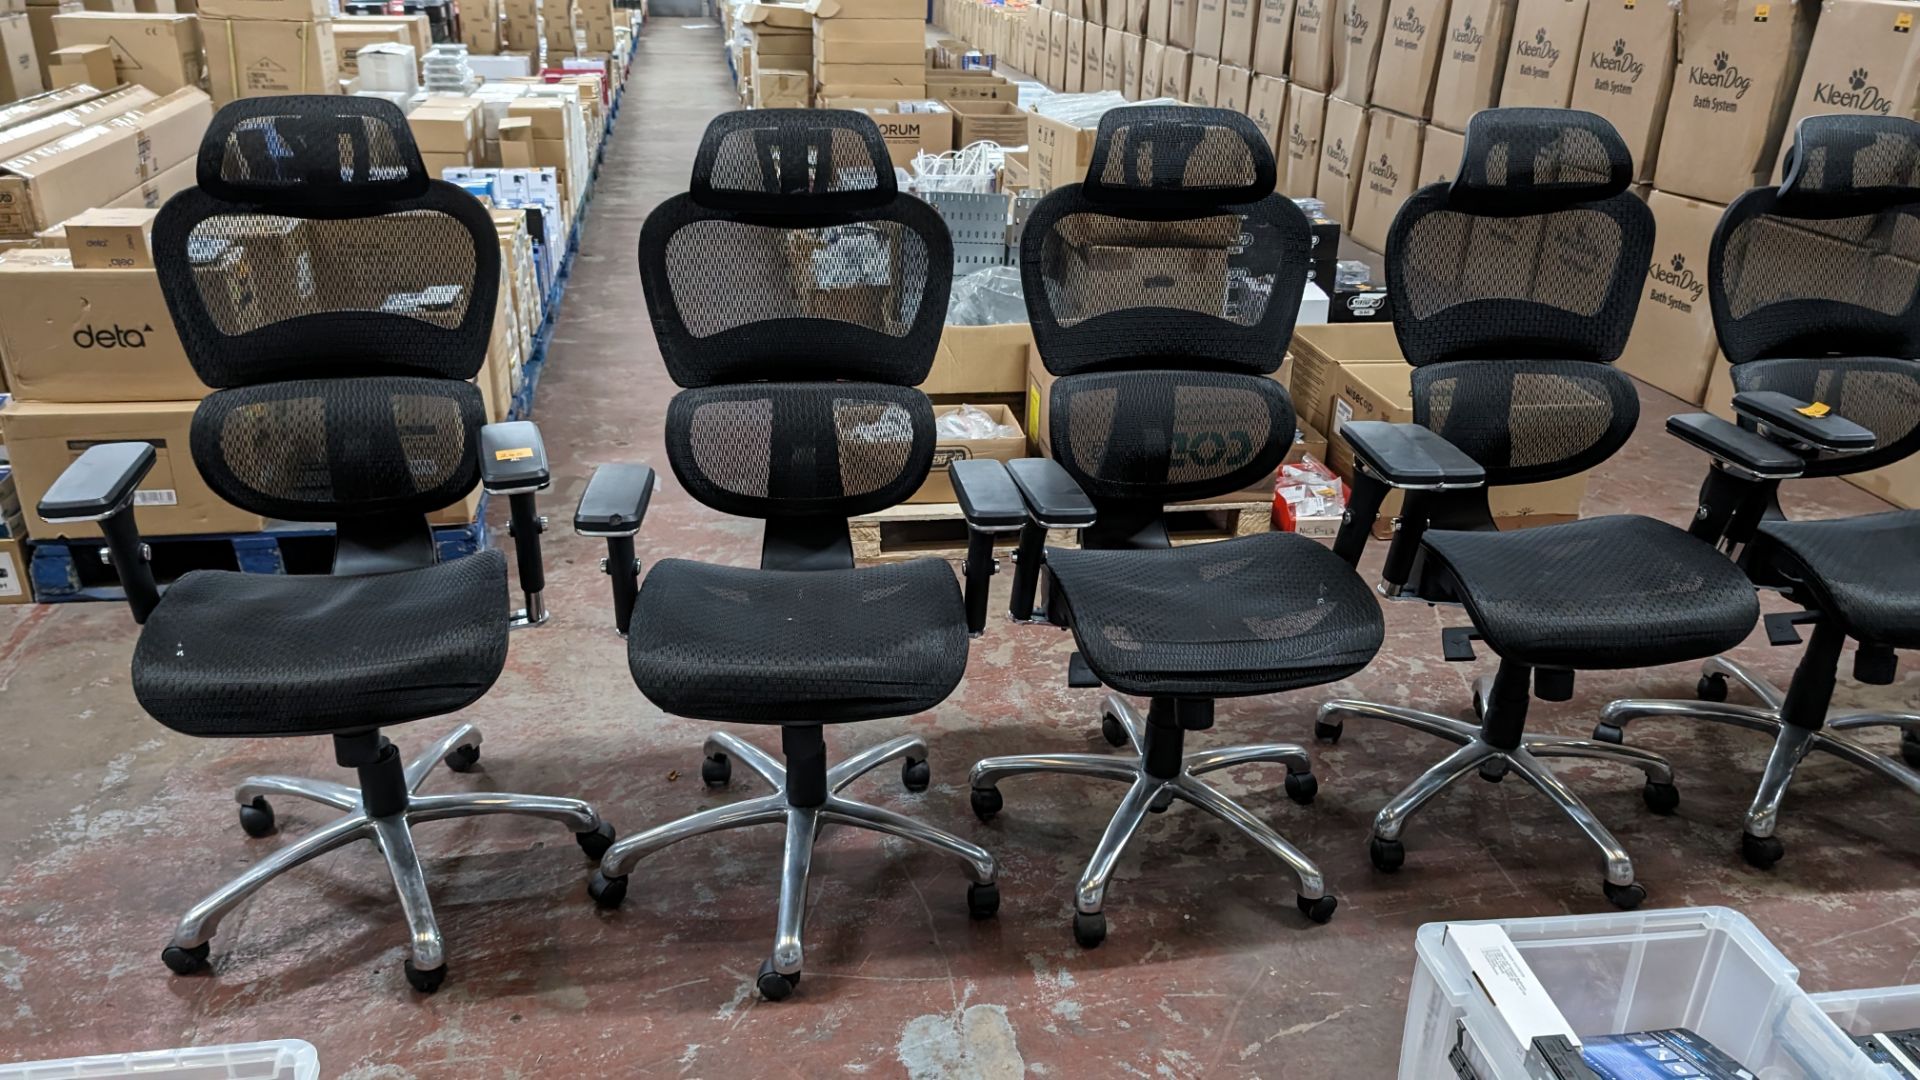 4 off black mesh fabric and chrome modern chairs with arms and headrests. NB: The chairs in lot 24